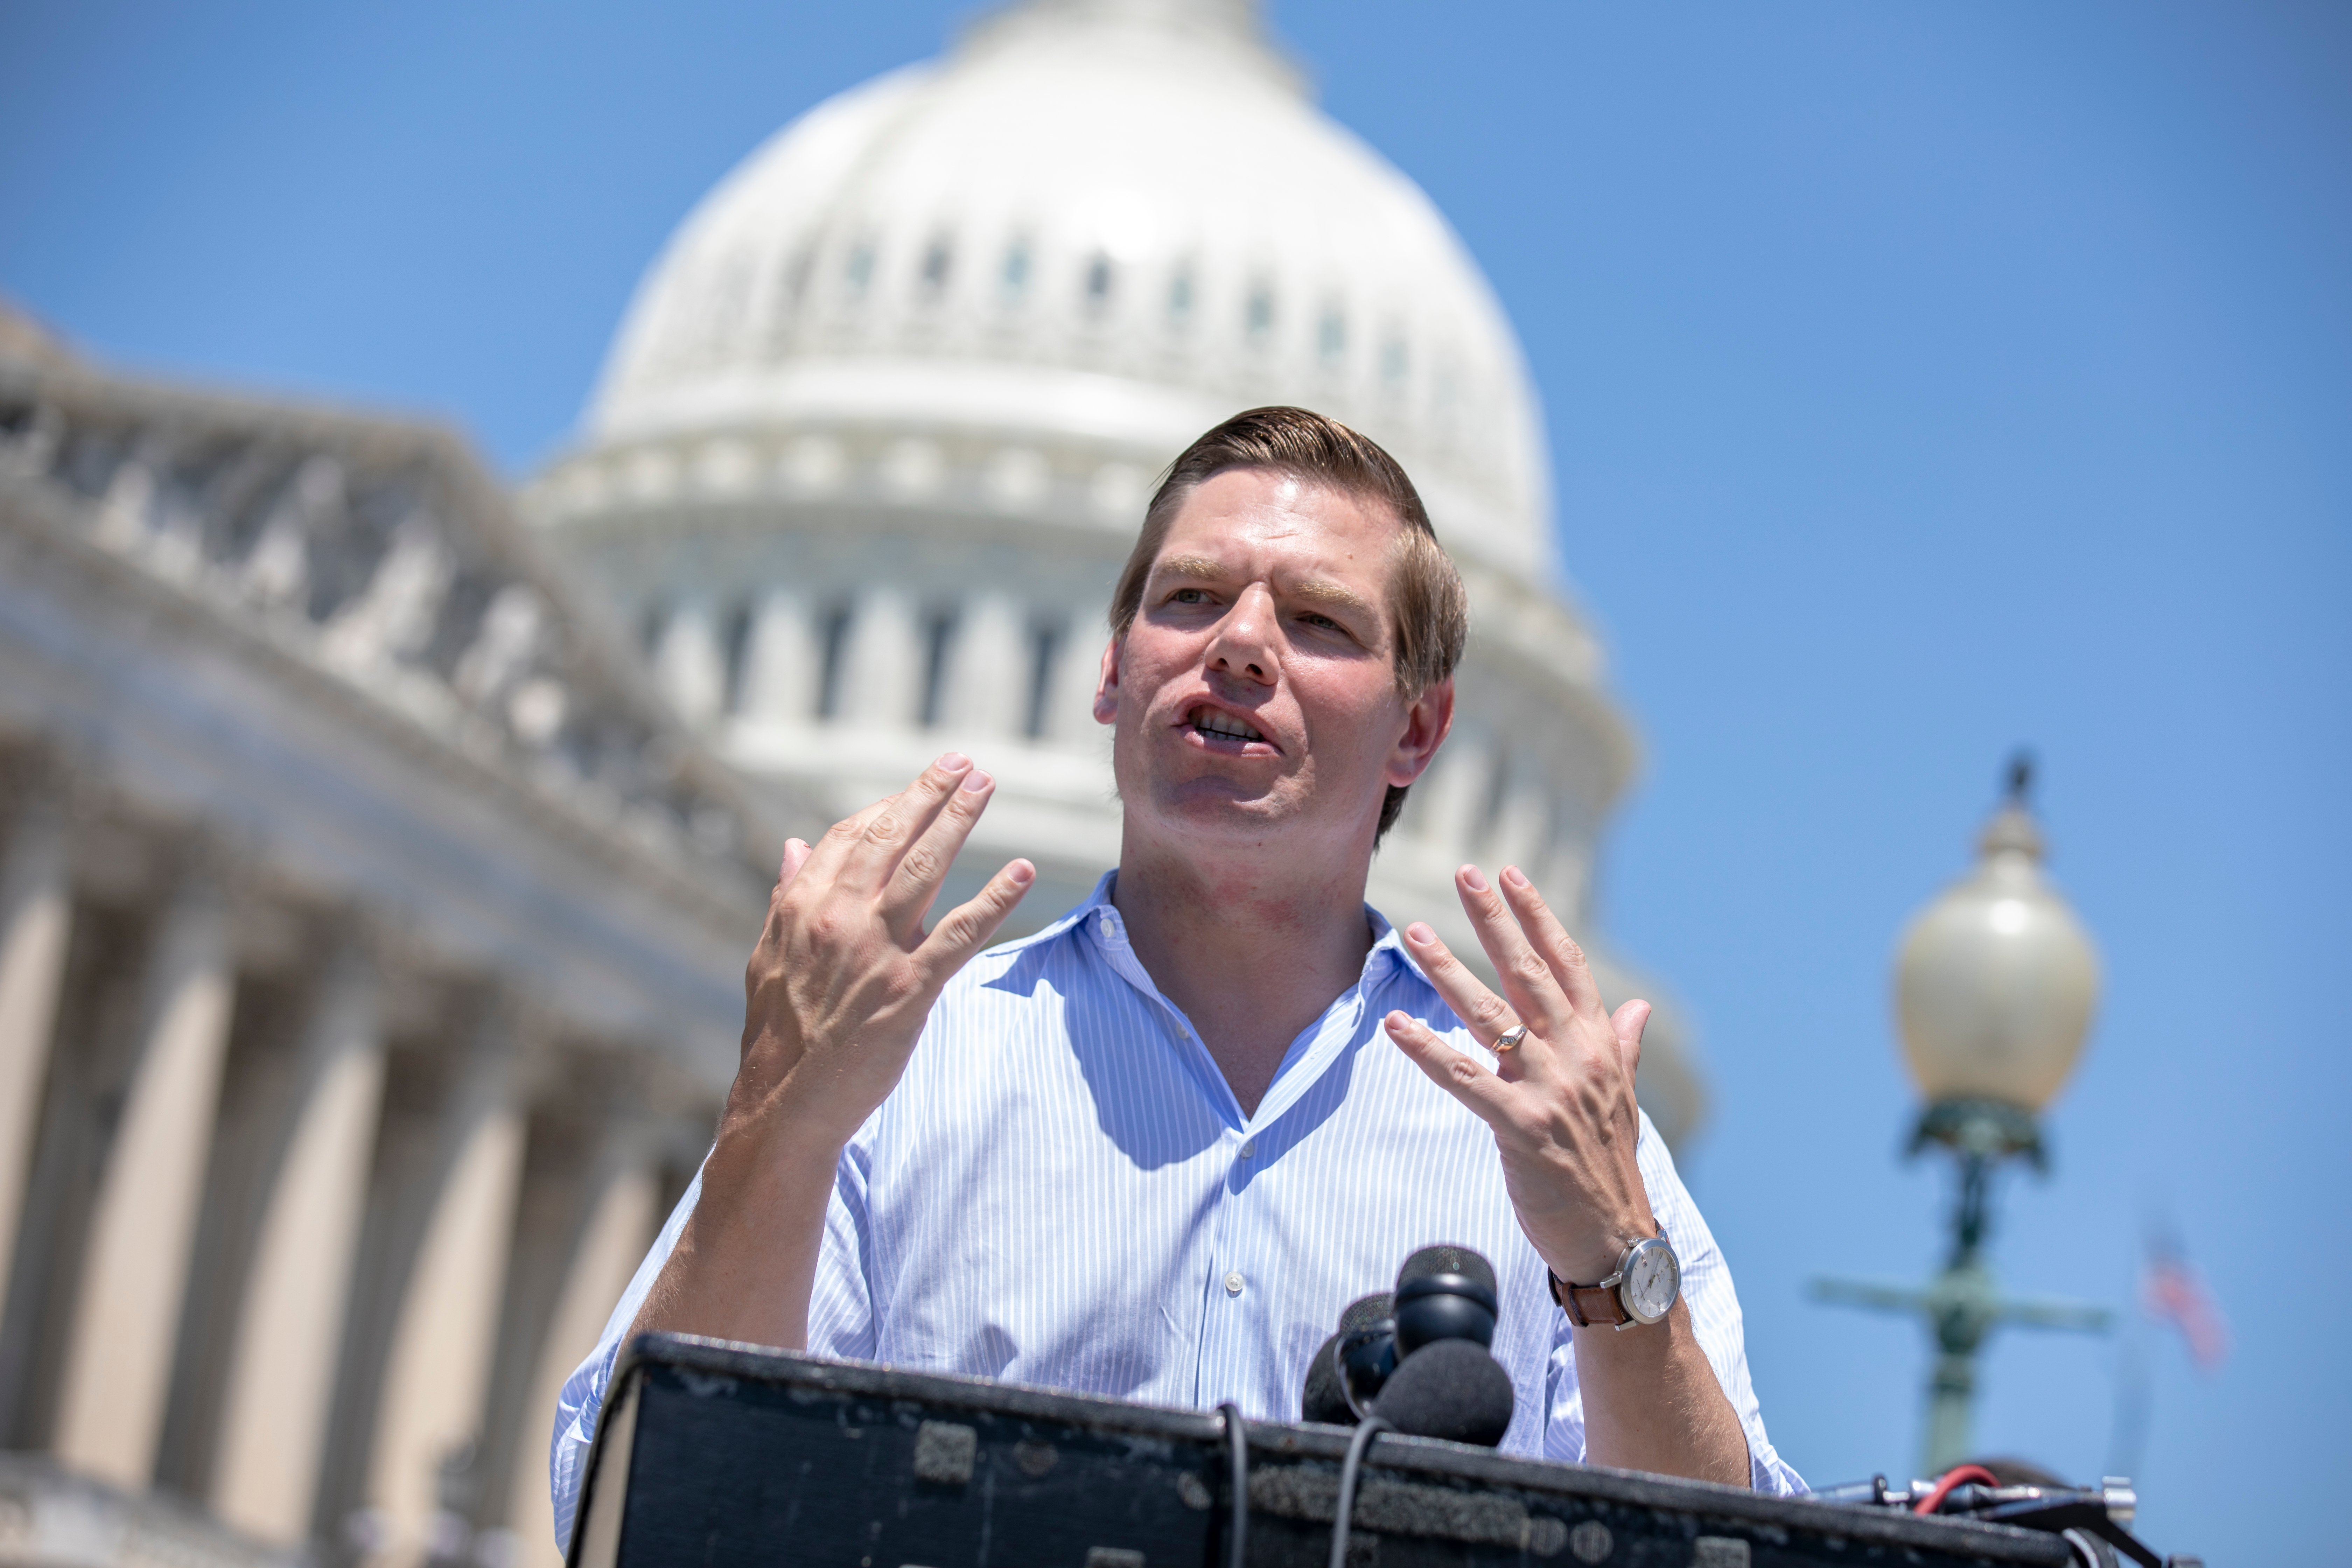 Rep. Eric Swalwell speaks during a news conference regarding the separation of immigrant children. (Alex Edelman/Getty Images)